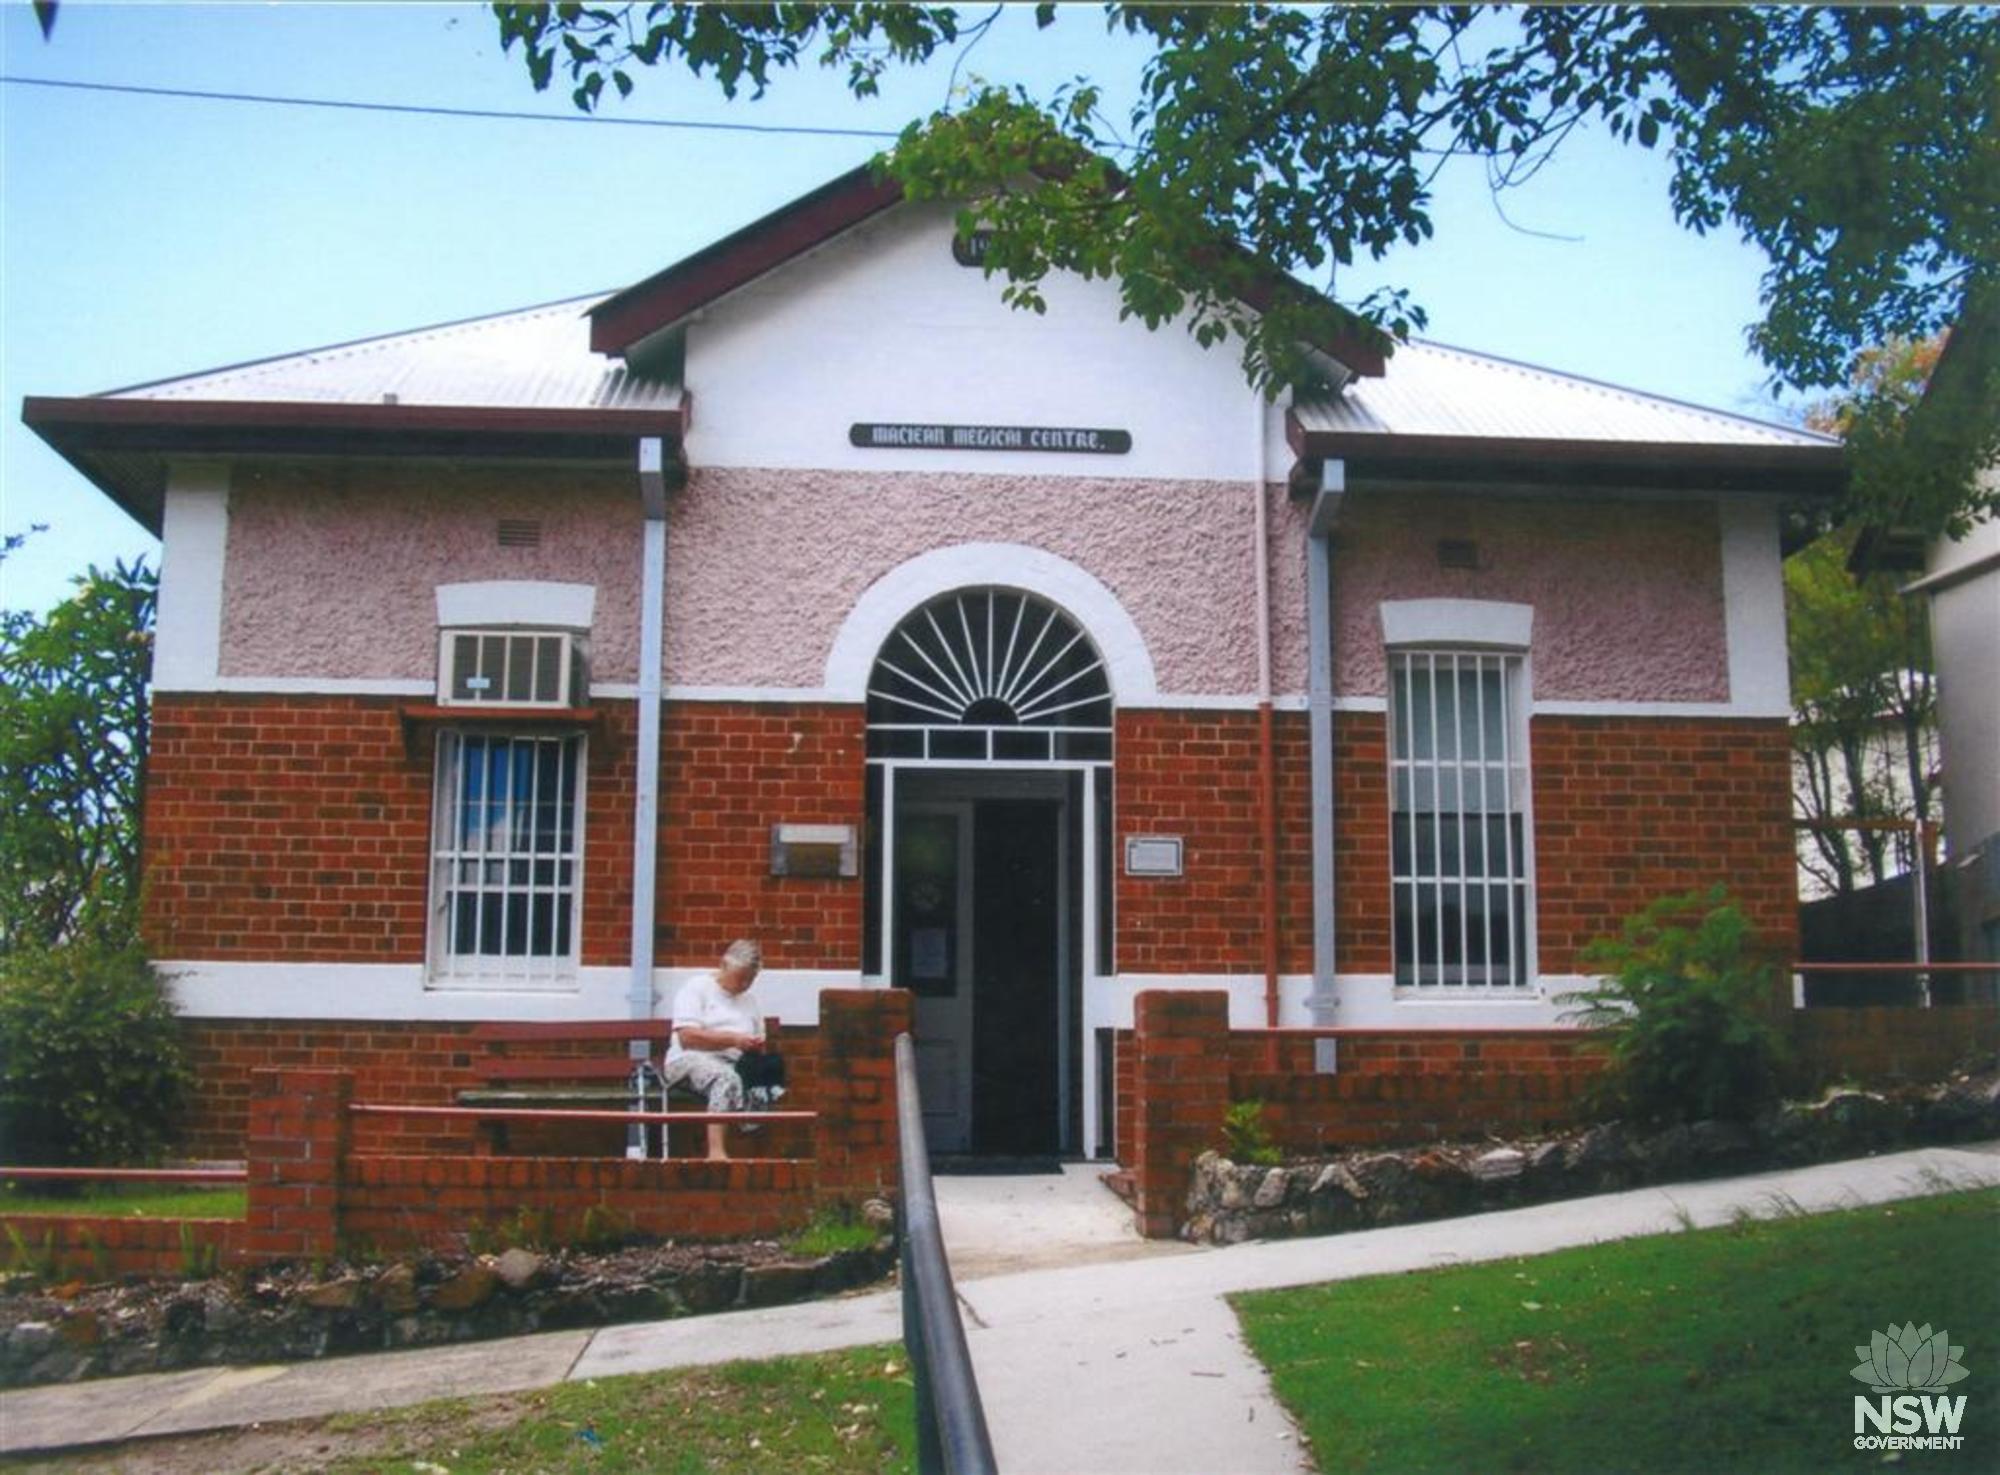 Former Harwood Shire Chambers in Maclean